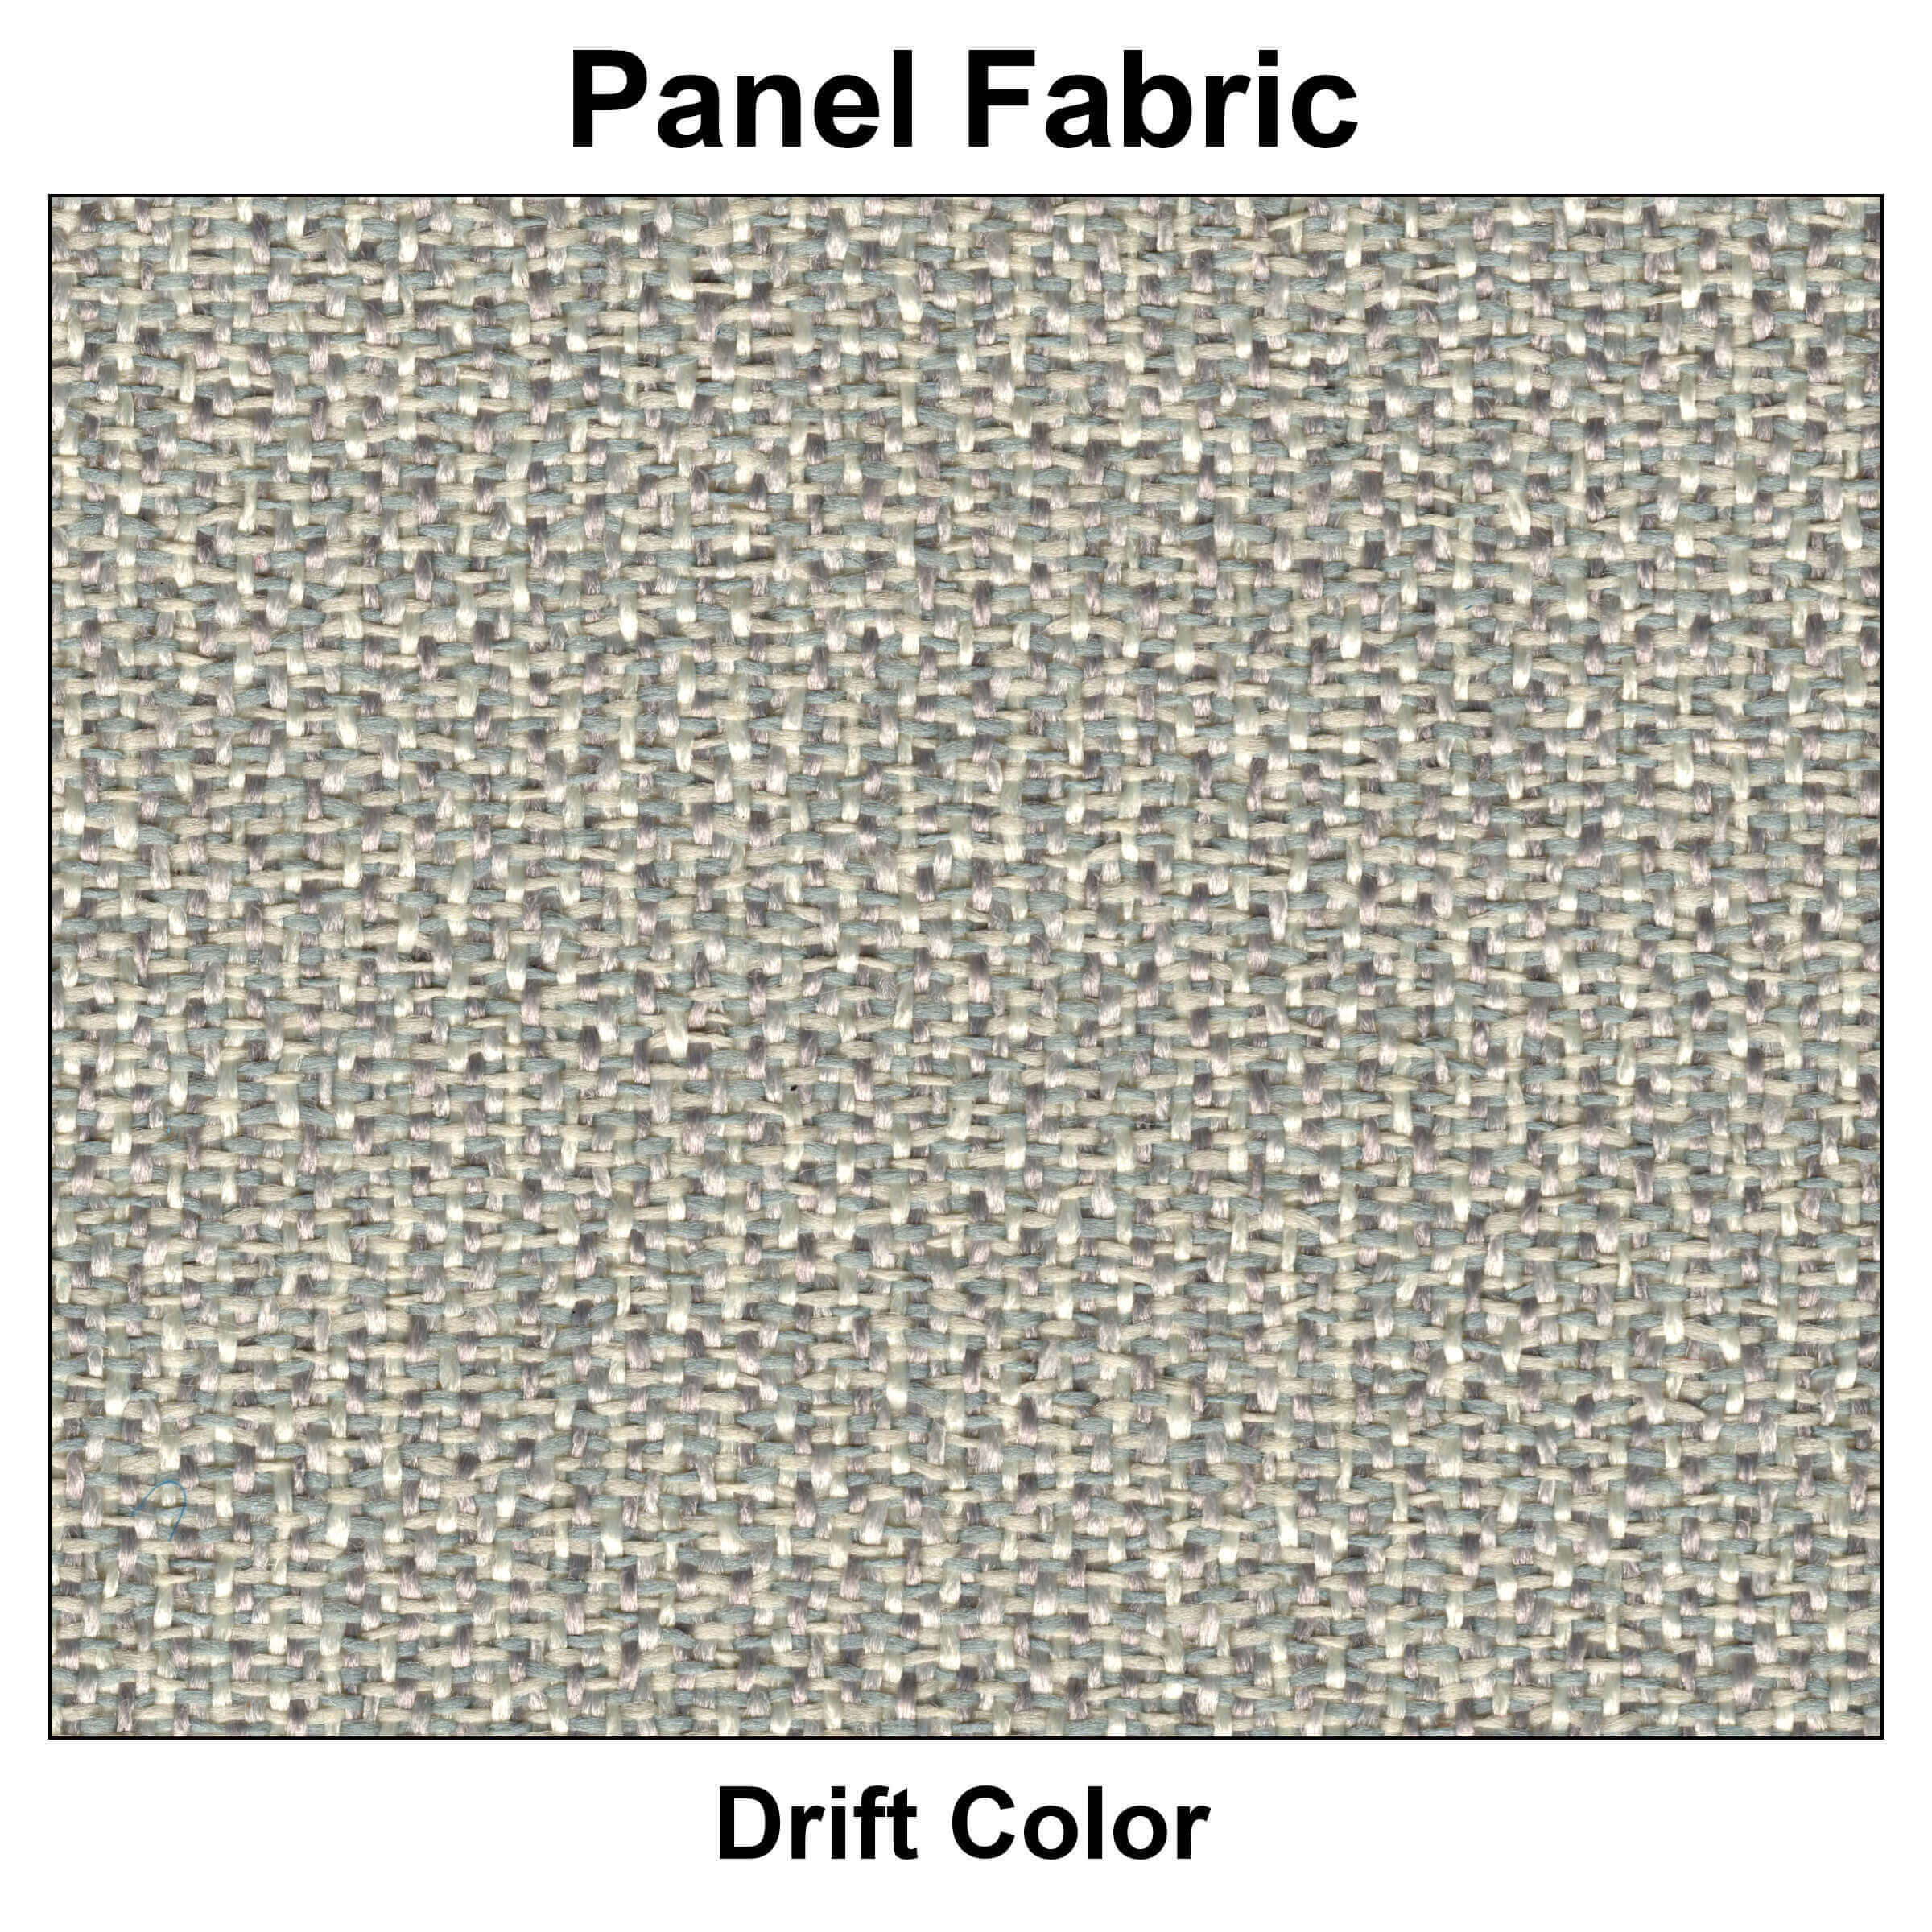 Cubicle fabric 1